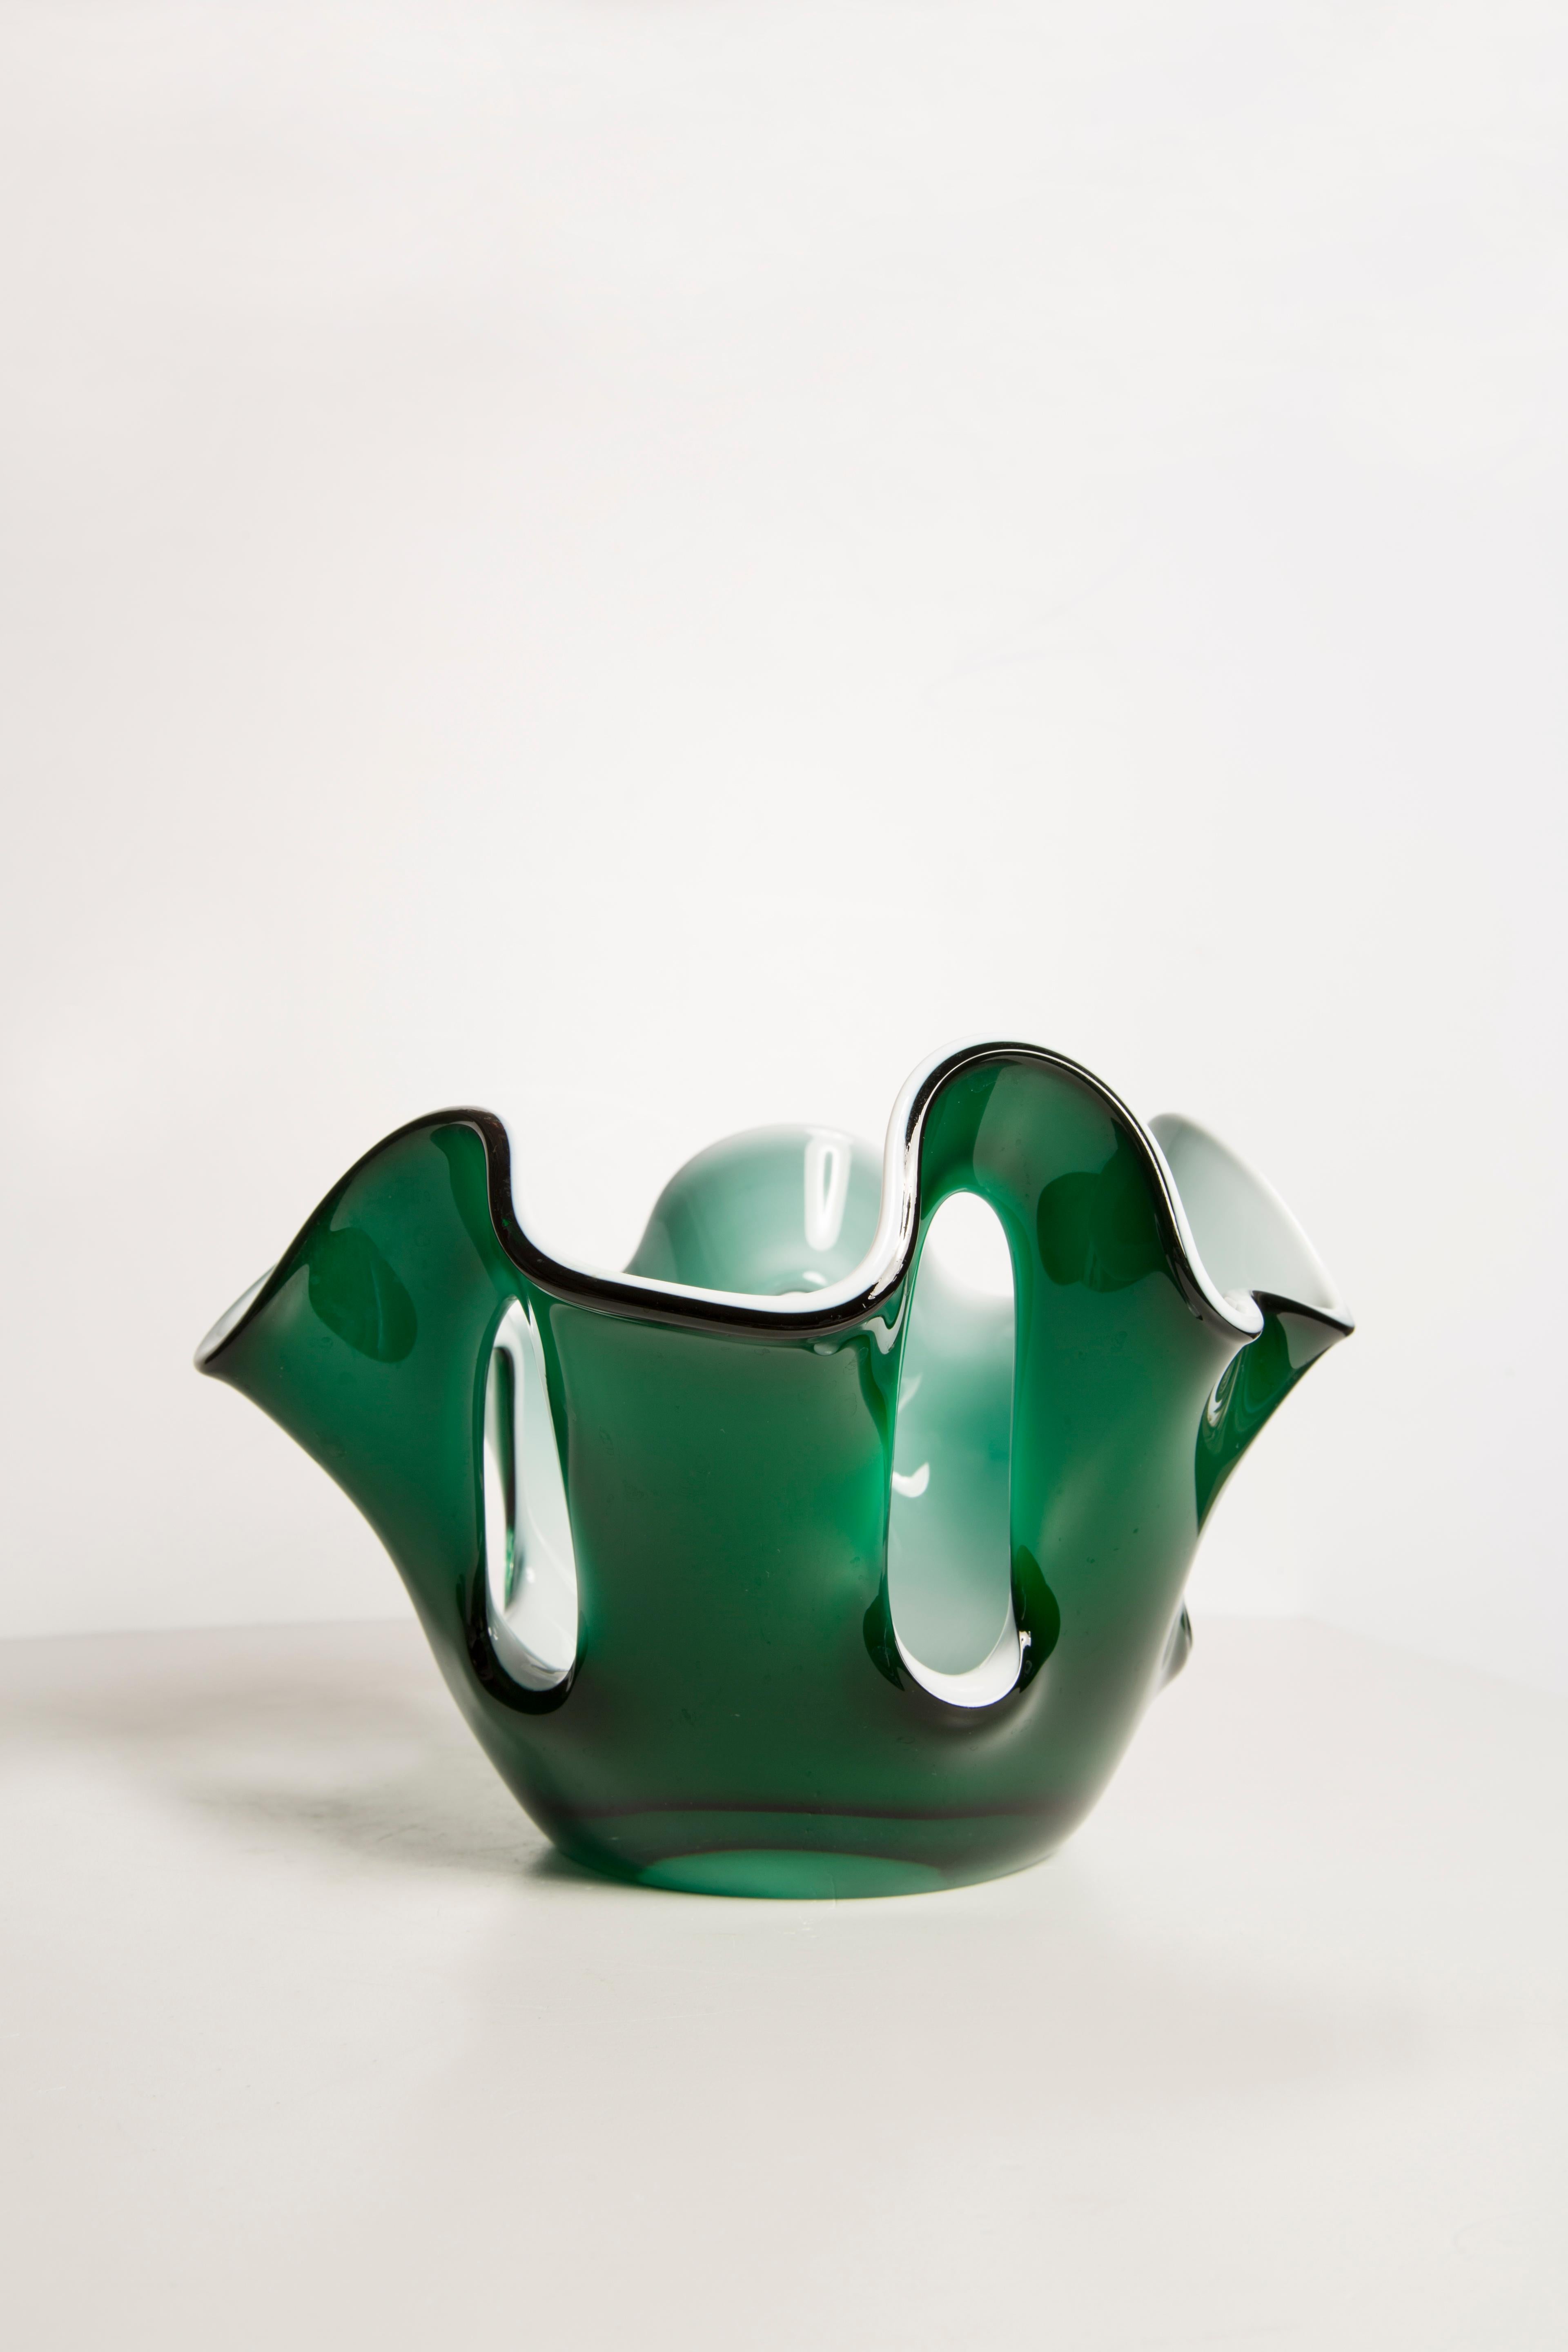 20th Century Mid-Century Green and White Vase Artistic Bowl Candlestick, Europe, 1960s For Sale